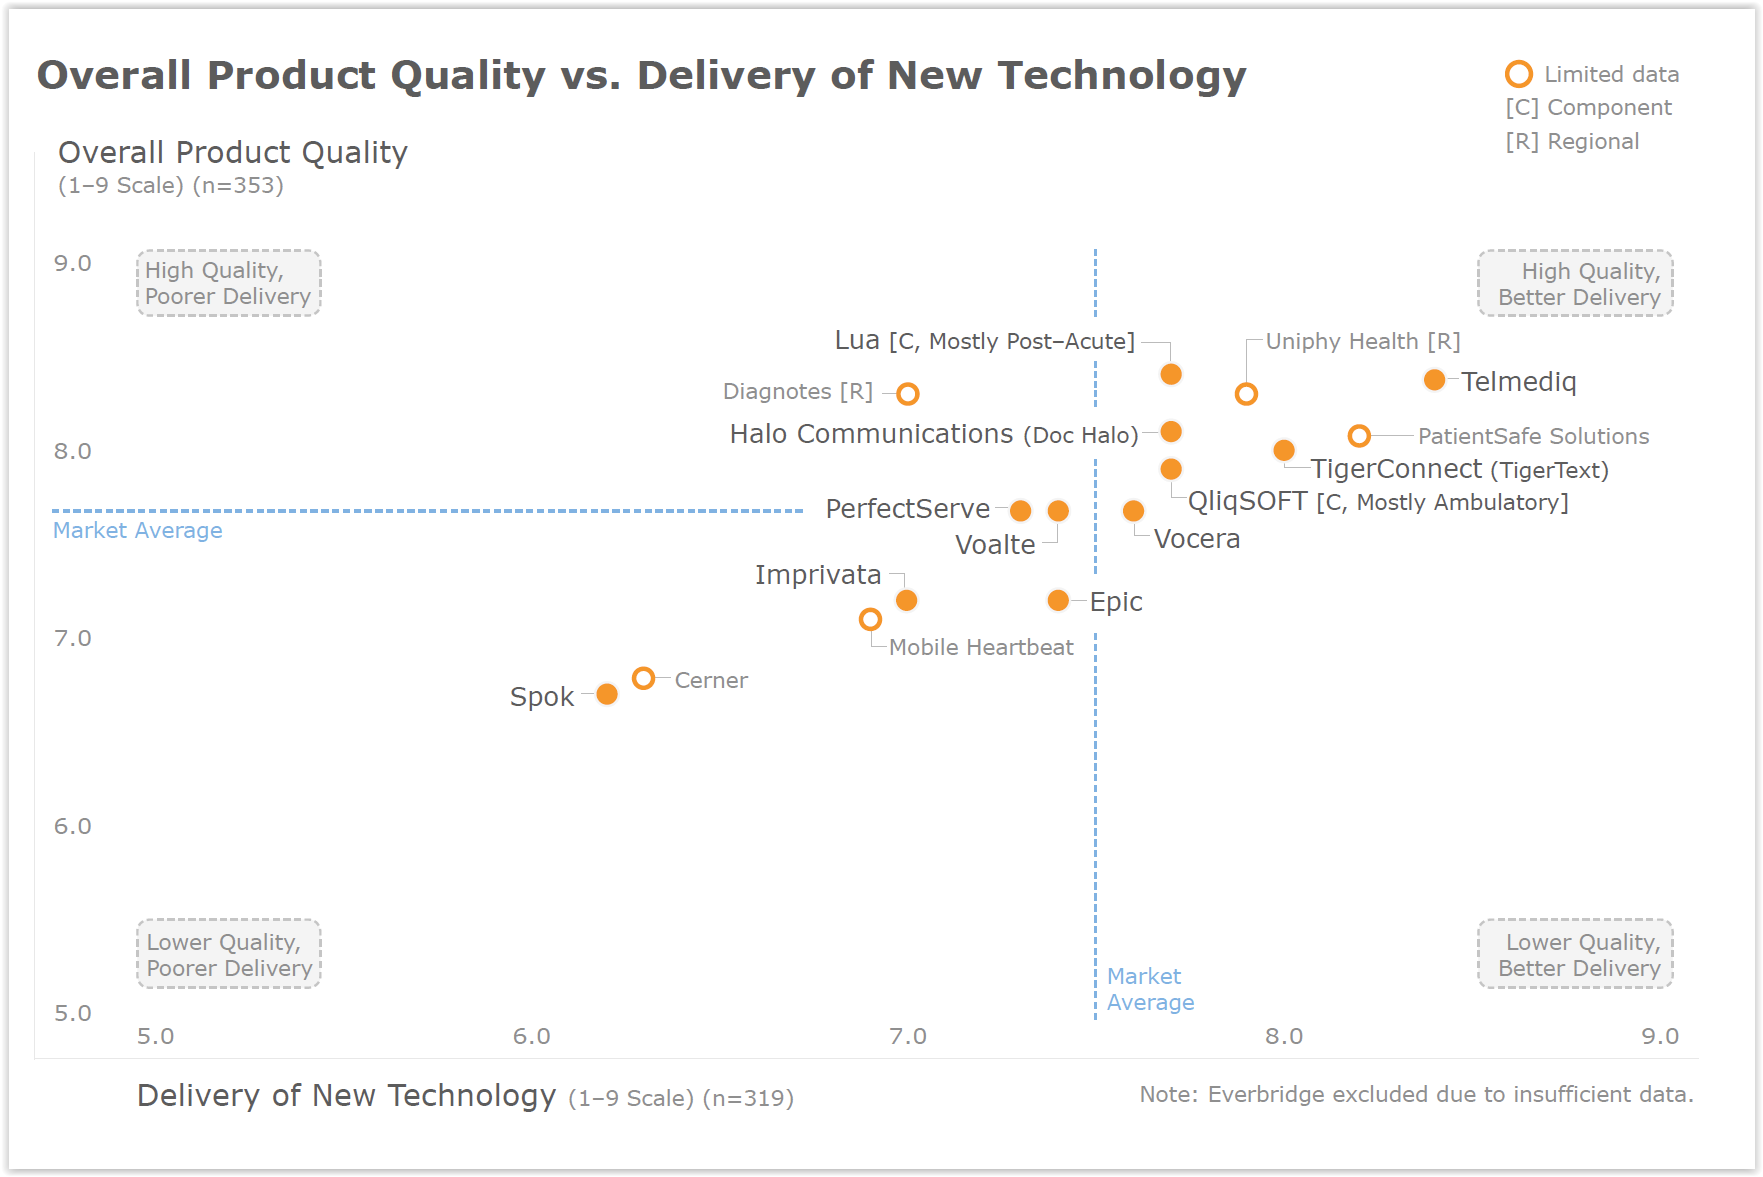 KLAS - Overall Product Quality vs Delivery - Secure Communications